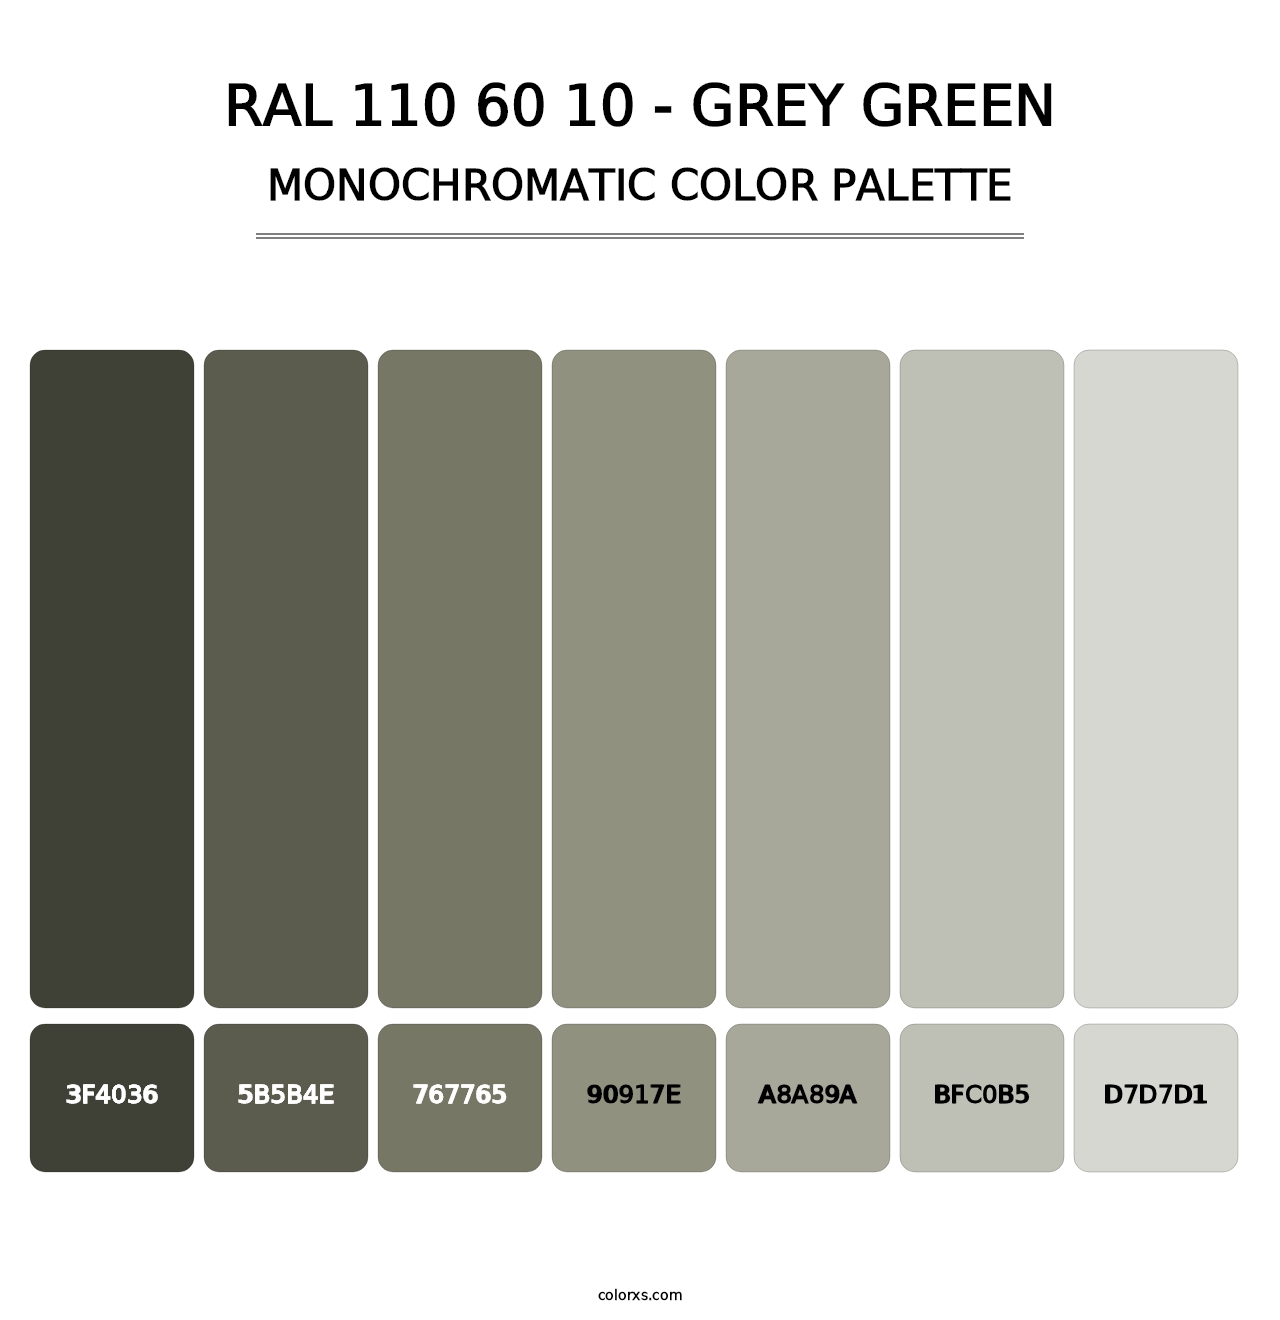 RAL 110 60 10 - Grey Green - Monochromatic Color Palette